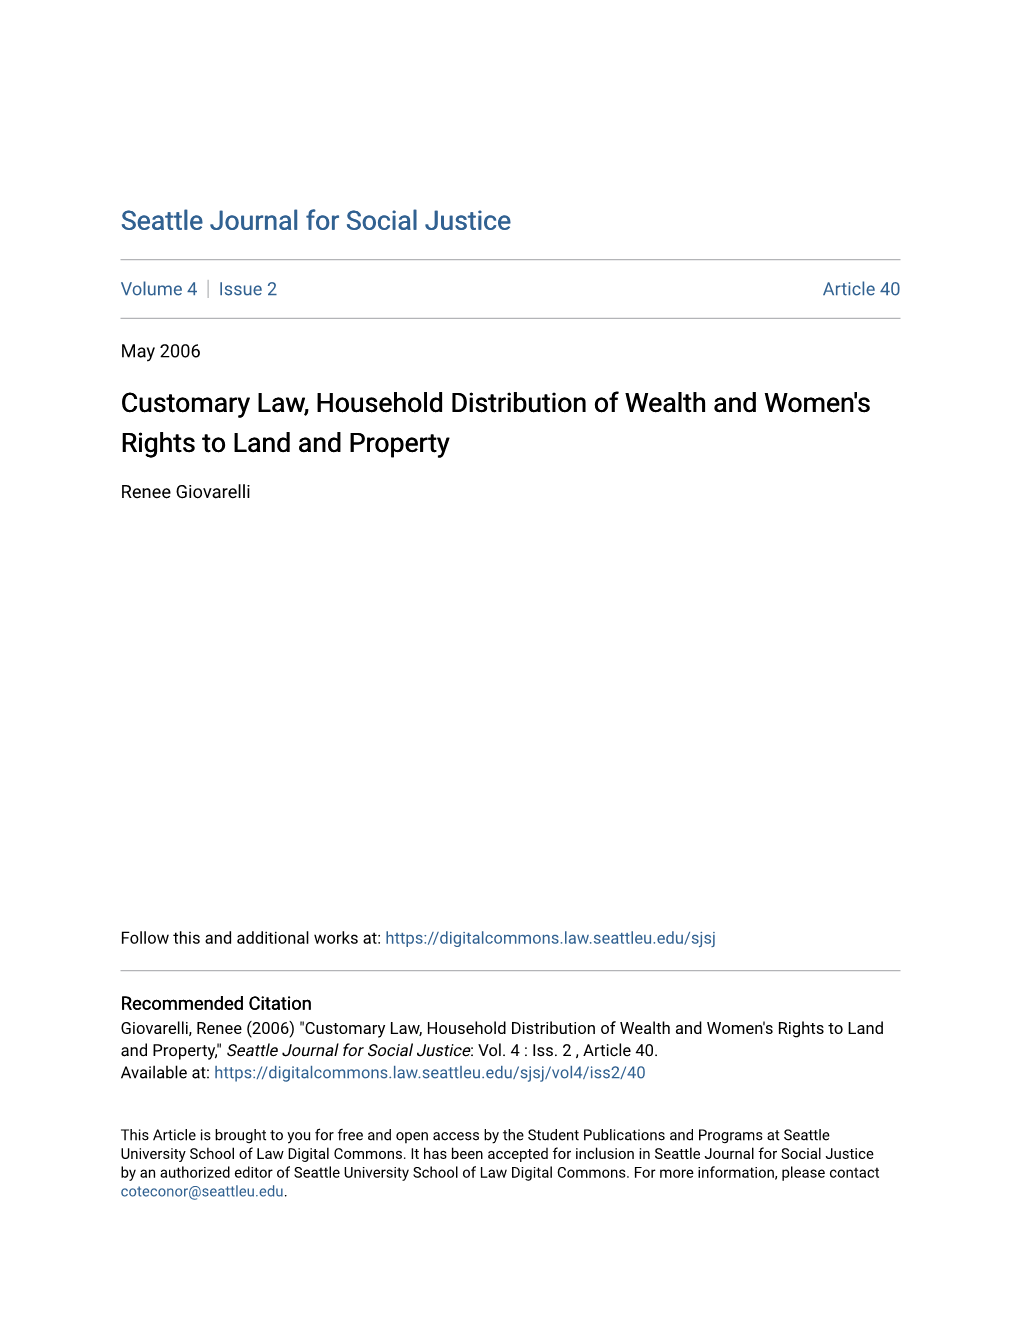 Customary Law, Household Distribution of Wealth and Women's Rights to Land and Property